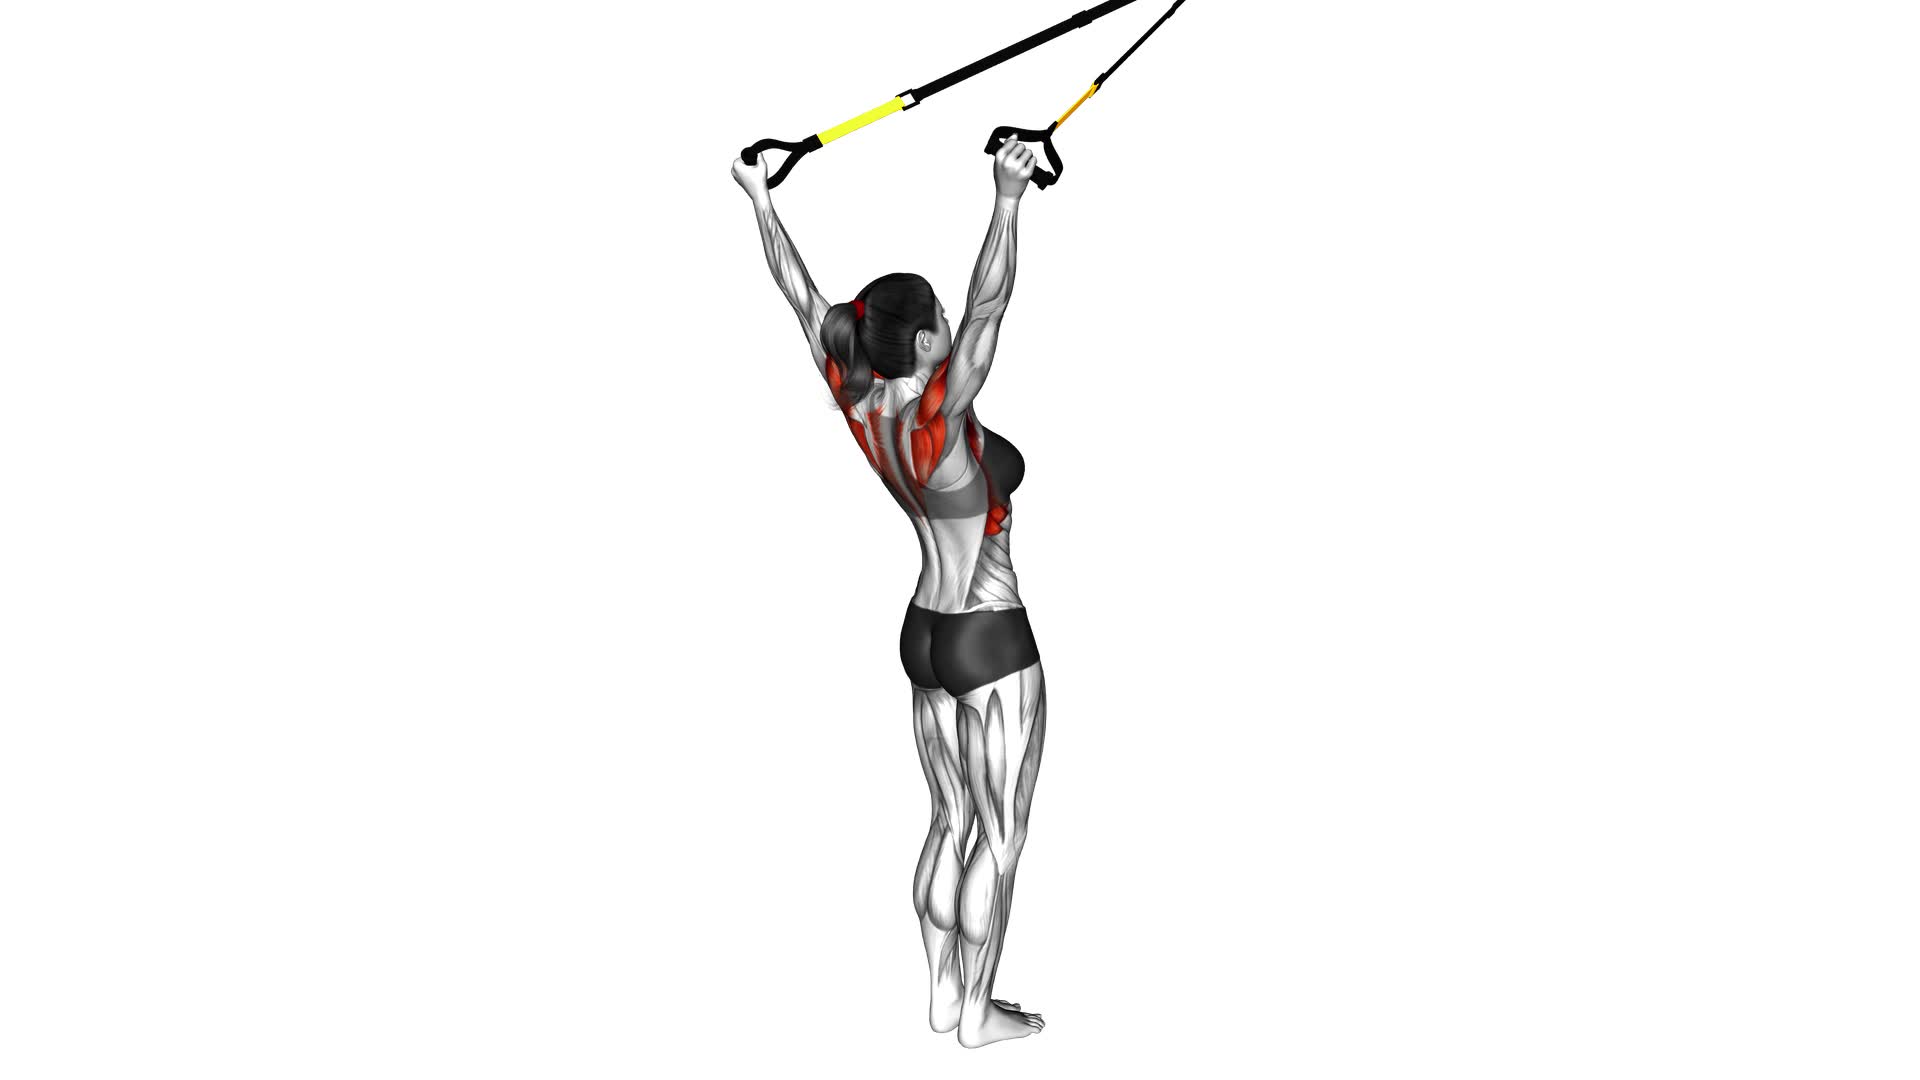 Suspender Y Lateral Raise (female) - Video Exercise Guide & Tips